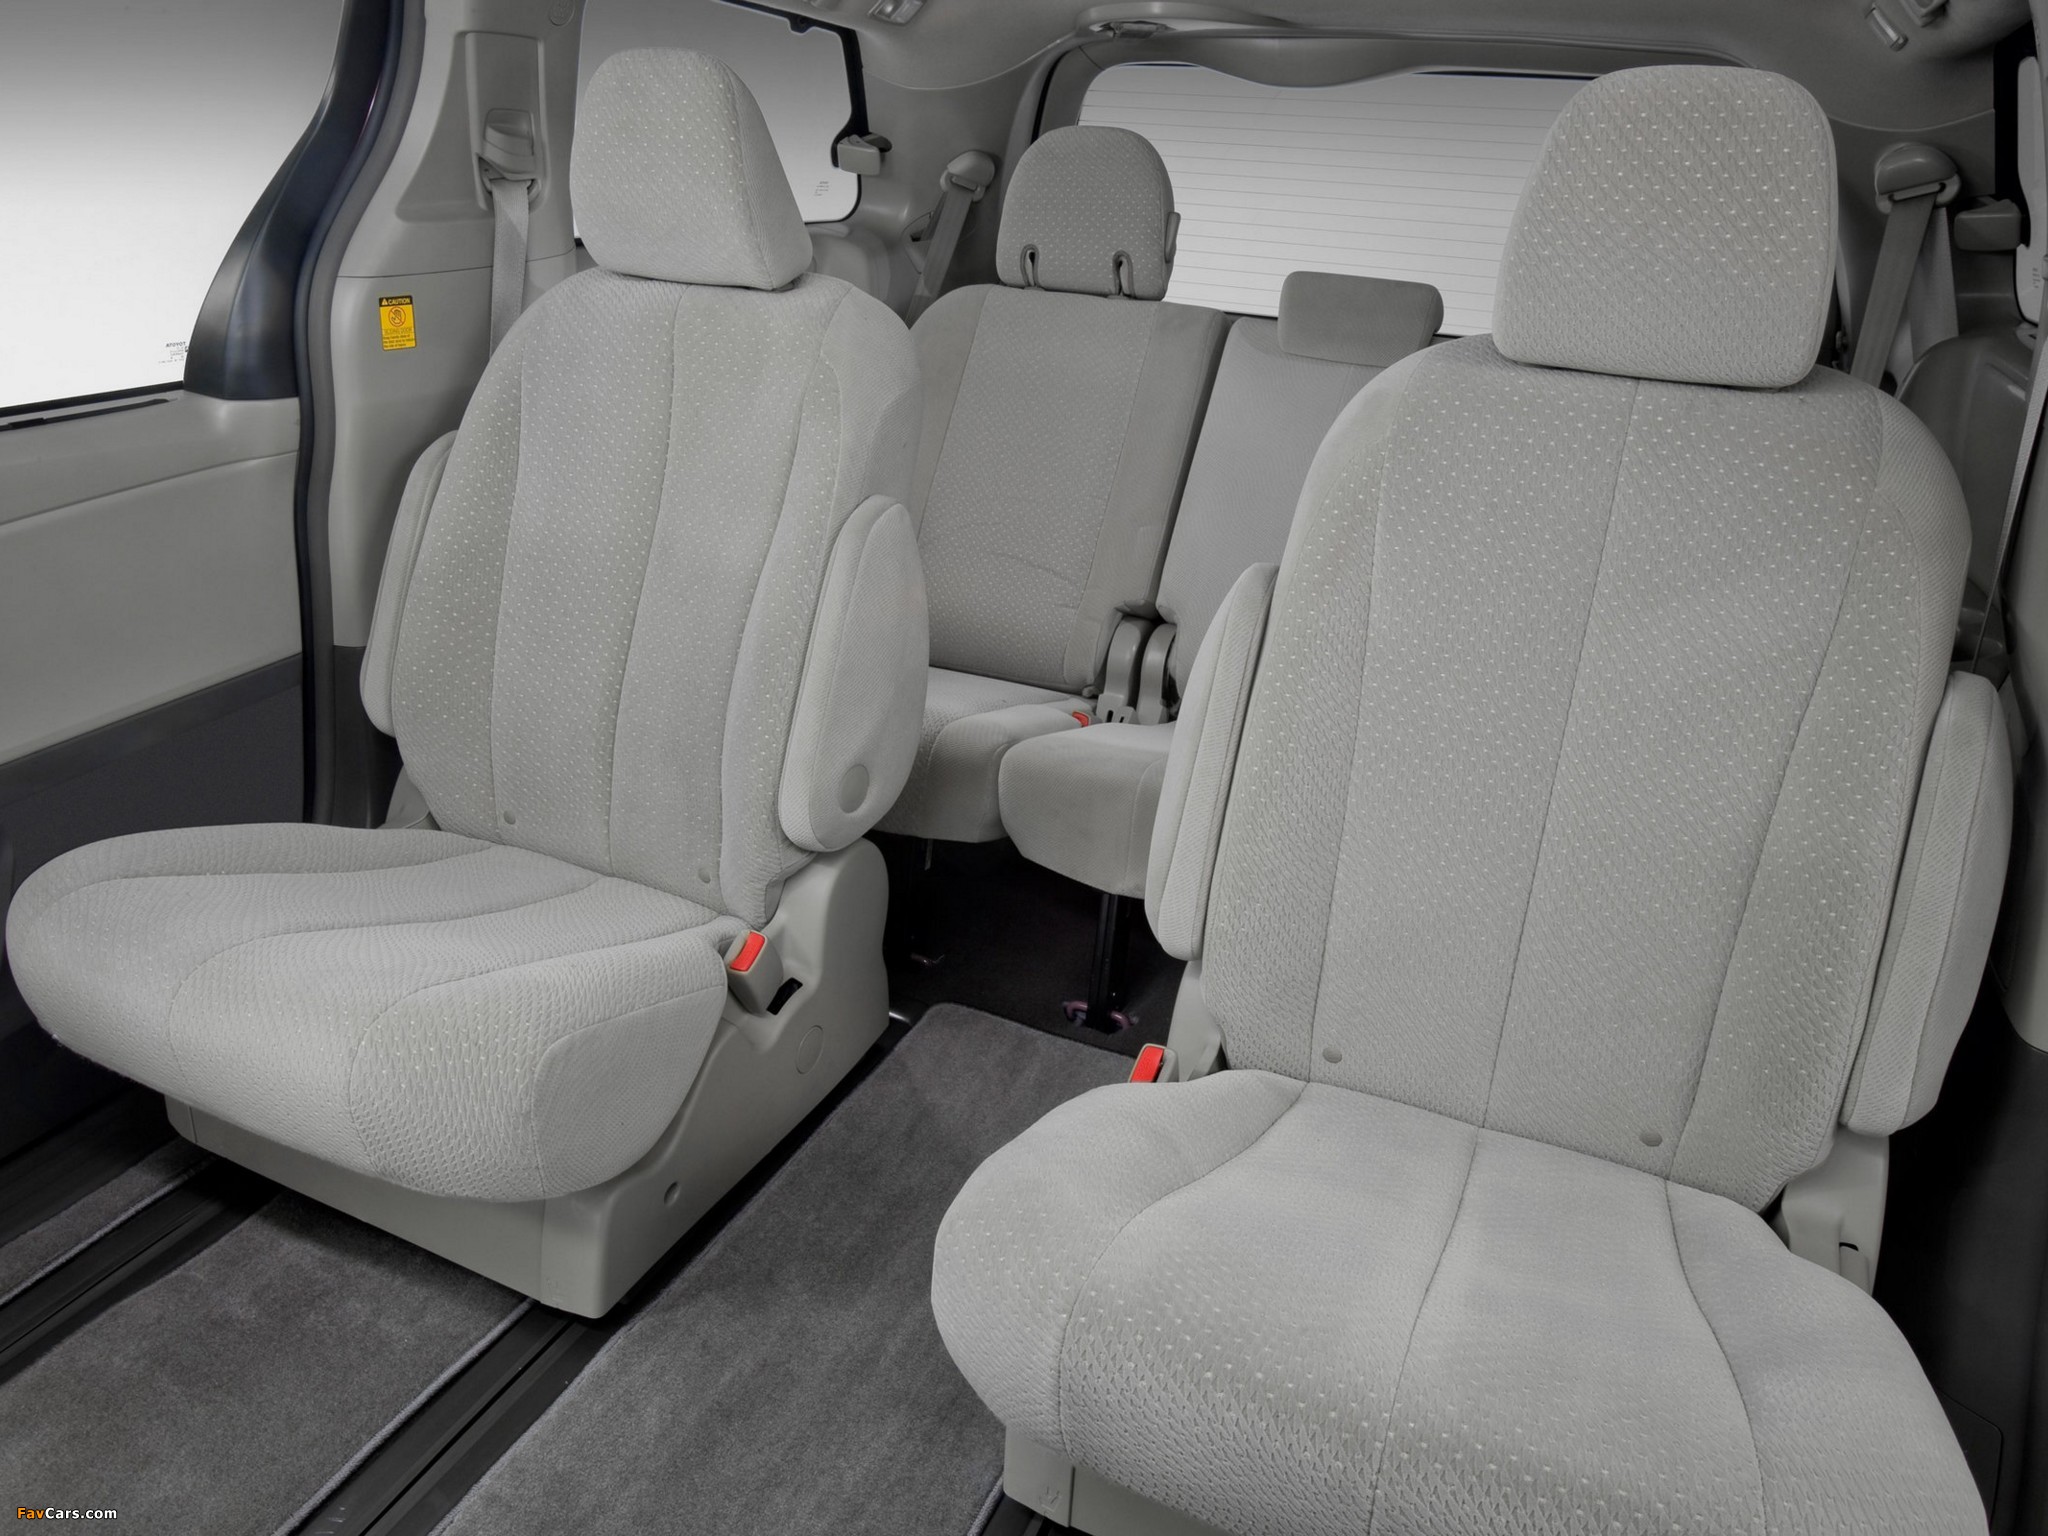 Toyota Sienna 2010 images (2048 x 1536)